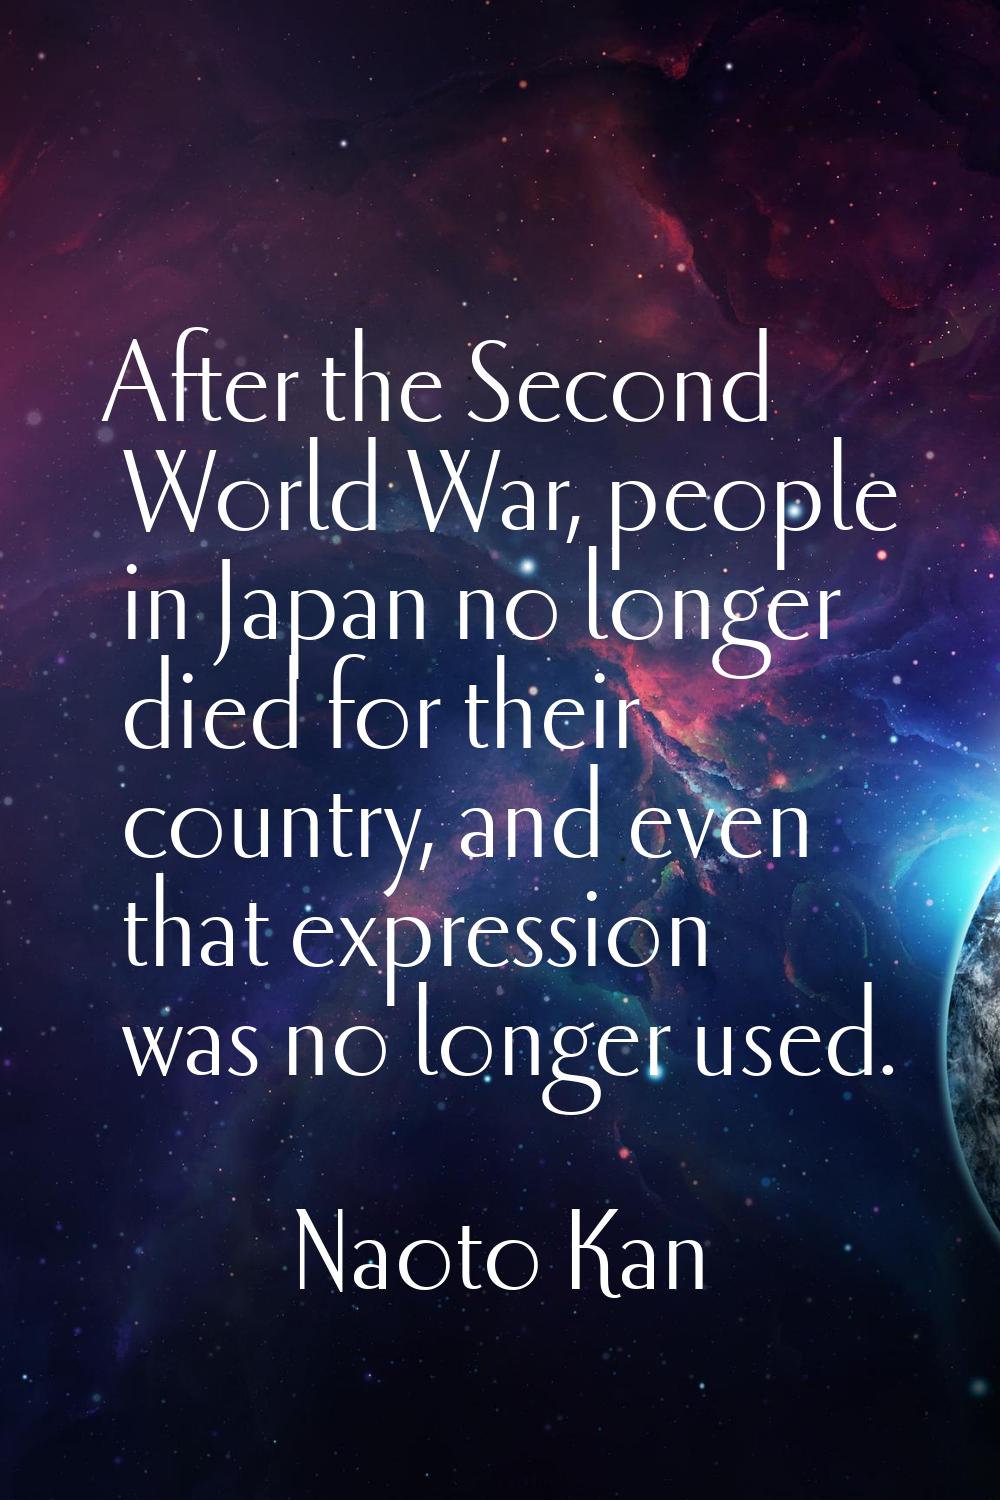 After the Second World War, people in Japan no longer died for their country, and even that express